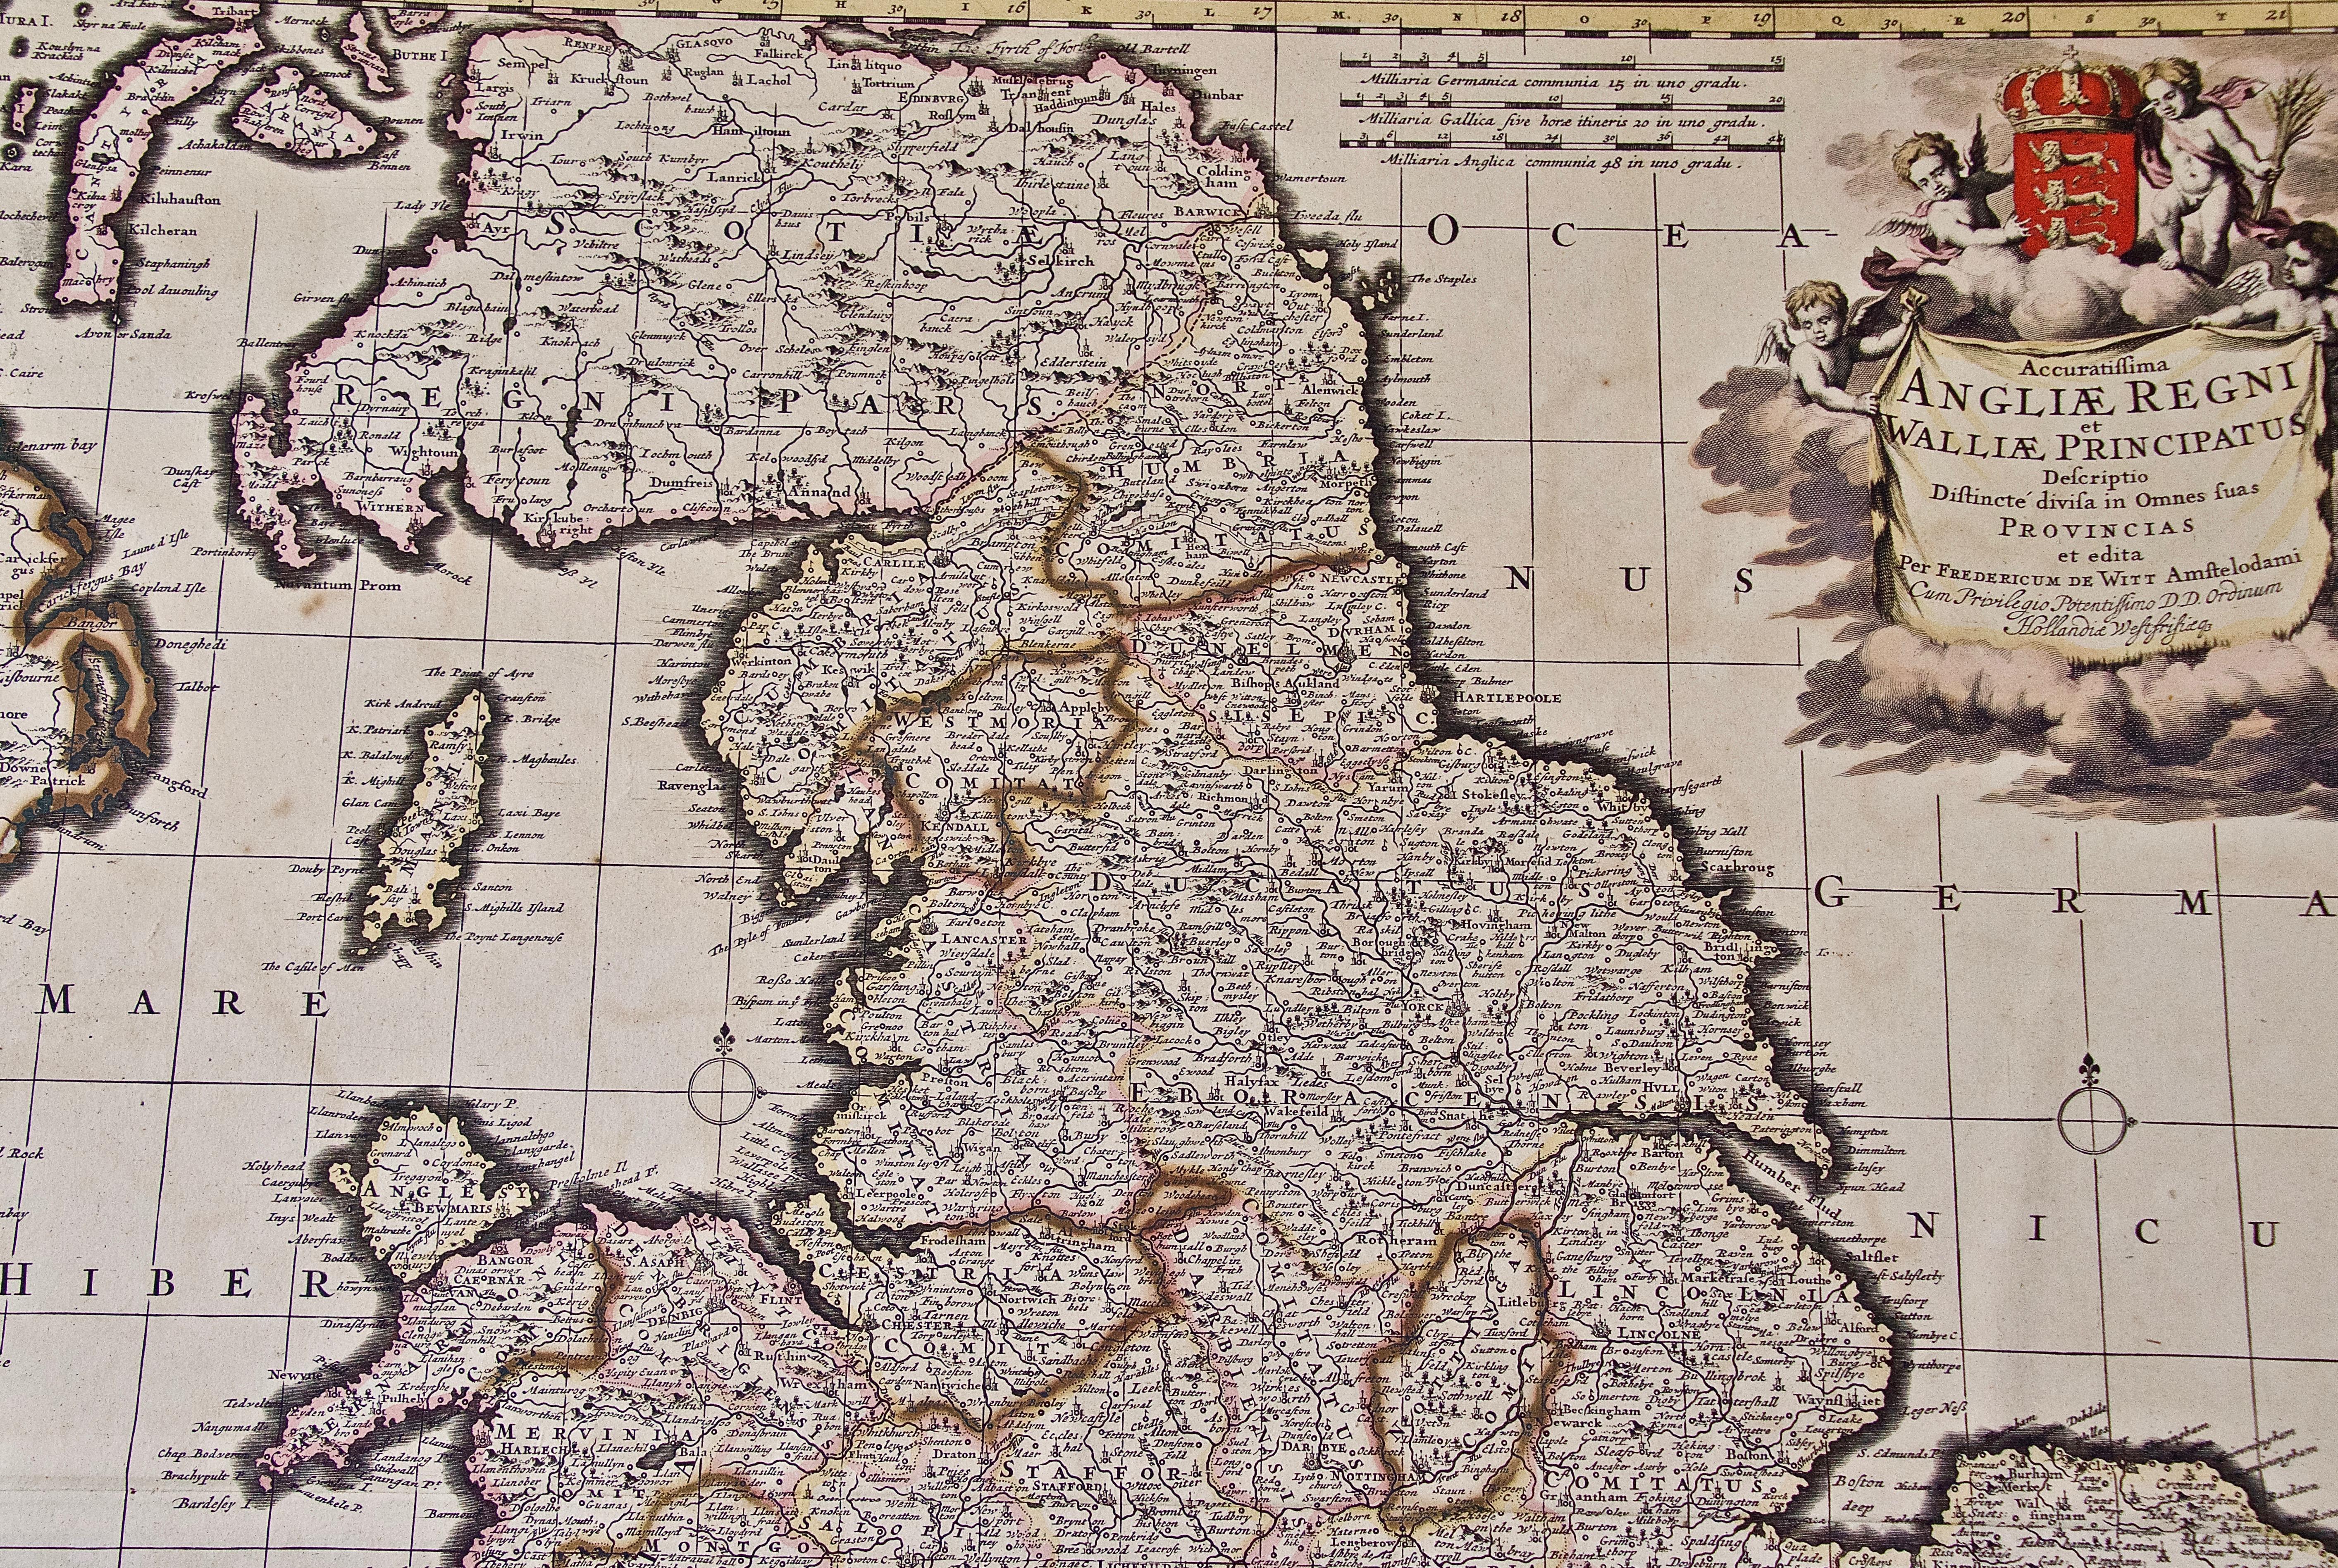 England and the British Isles: A Large 17th Century Hand-colored Map by de Wit - Other Art Style Print by Frederick de Wit